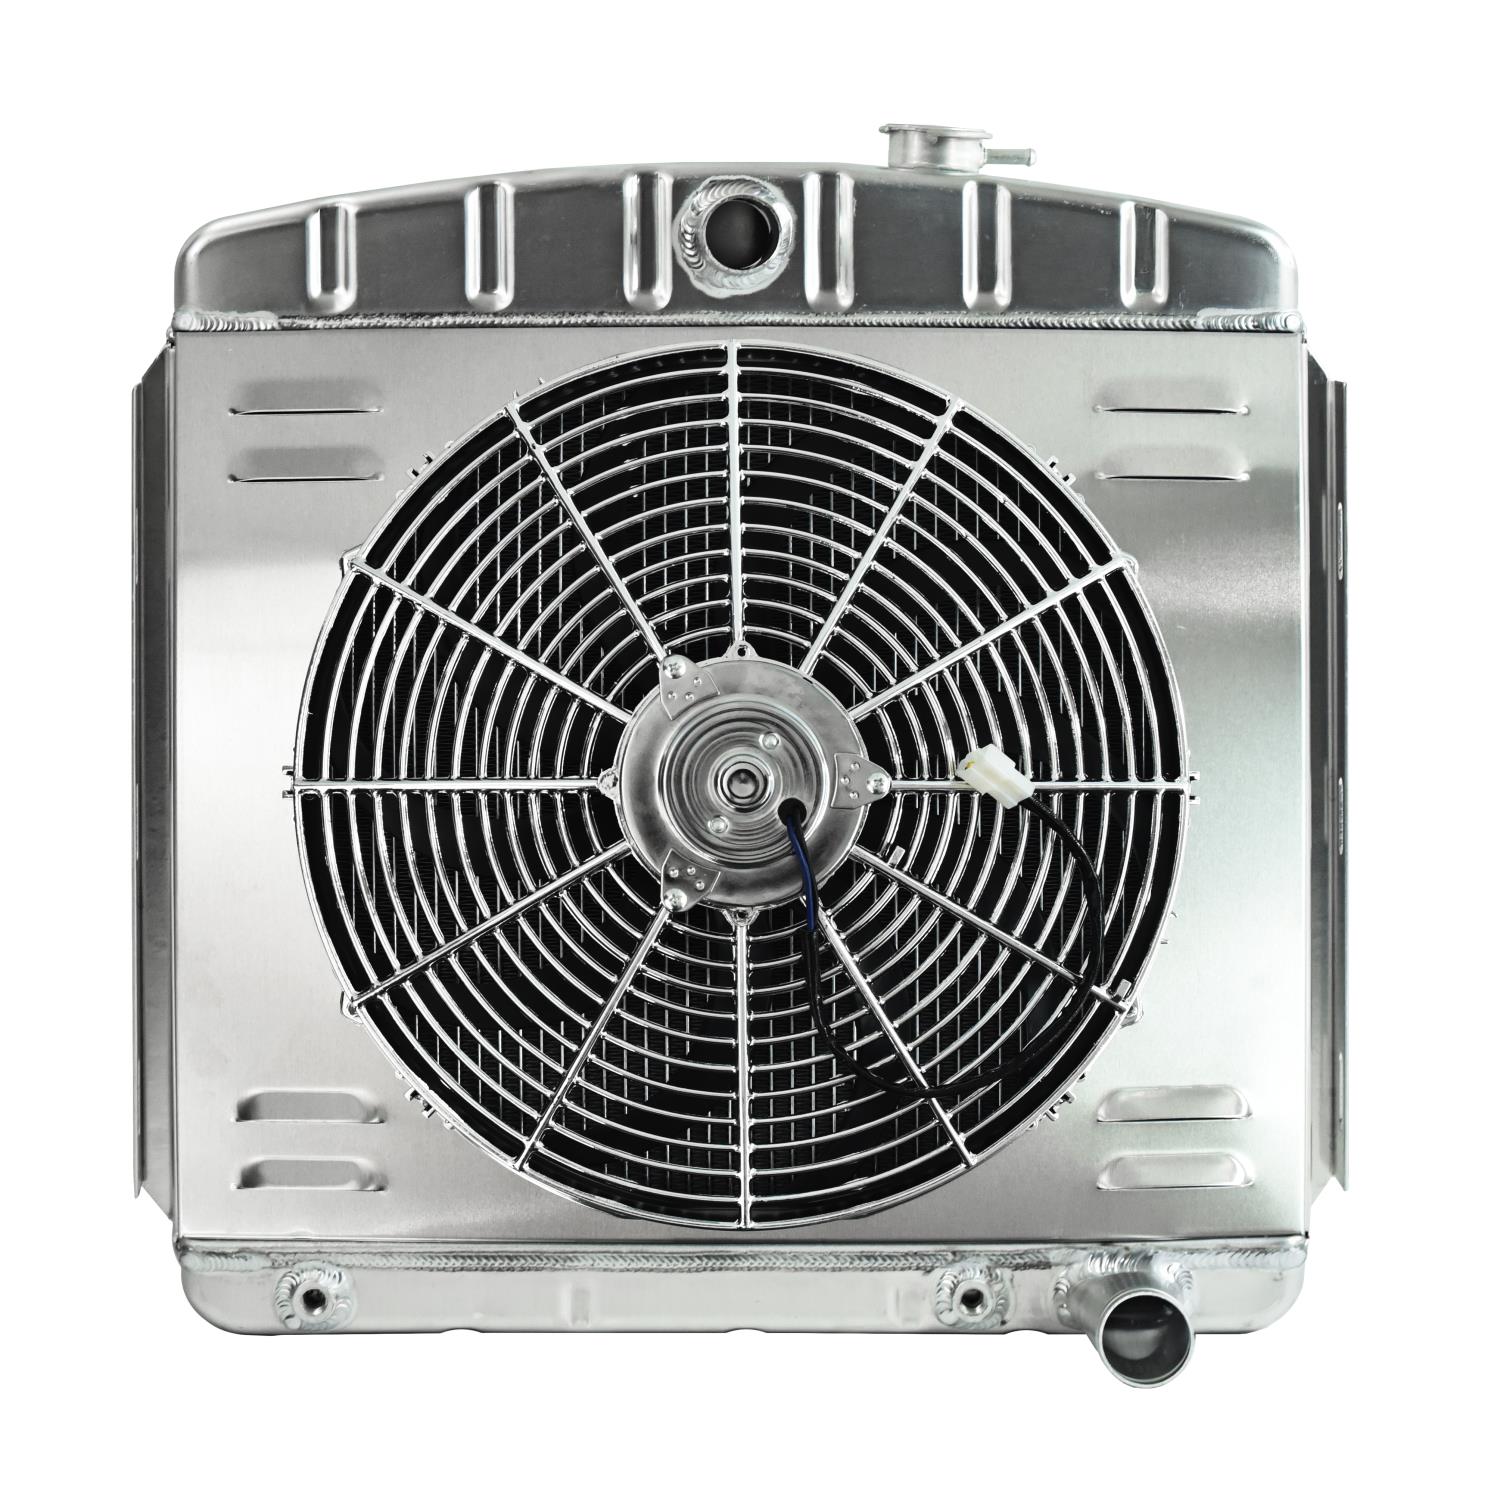 Aluminum Radiator & Fan Combo for Select 1955-1956 Chevrolet 6-cyl. Models w/Chevy Big Block V8 Eng. Conversion [16 in. Fan]